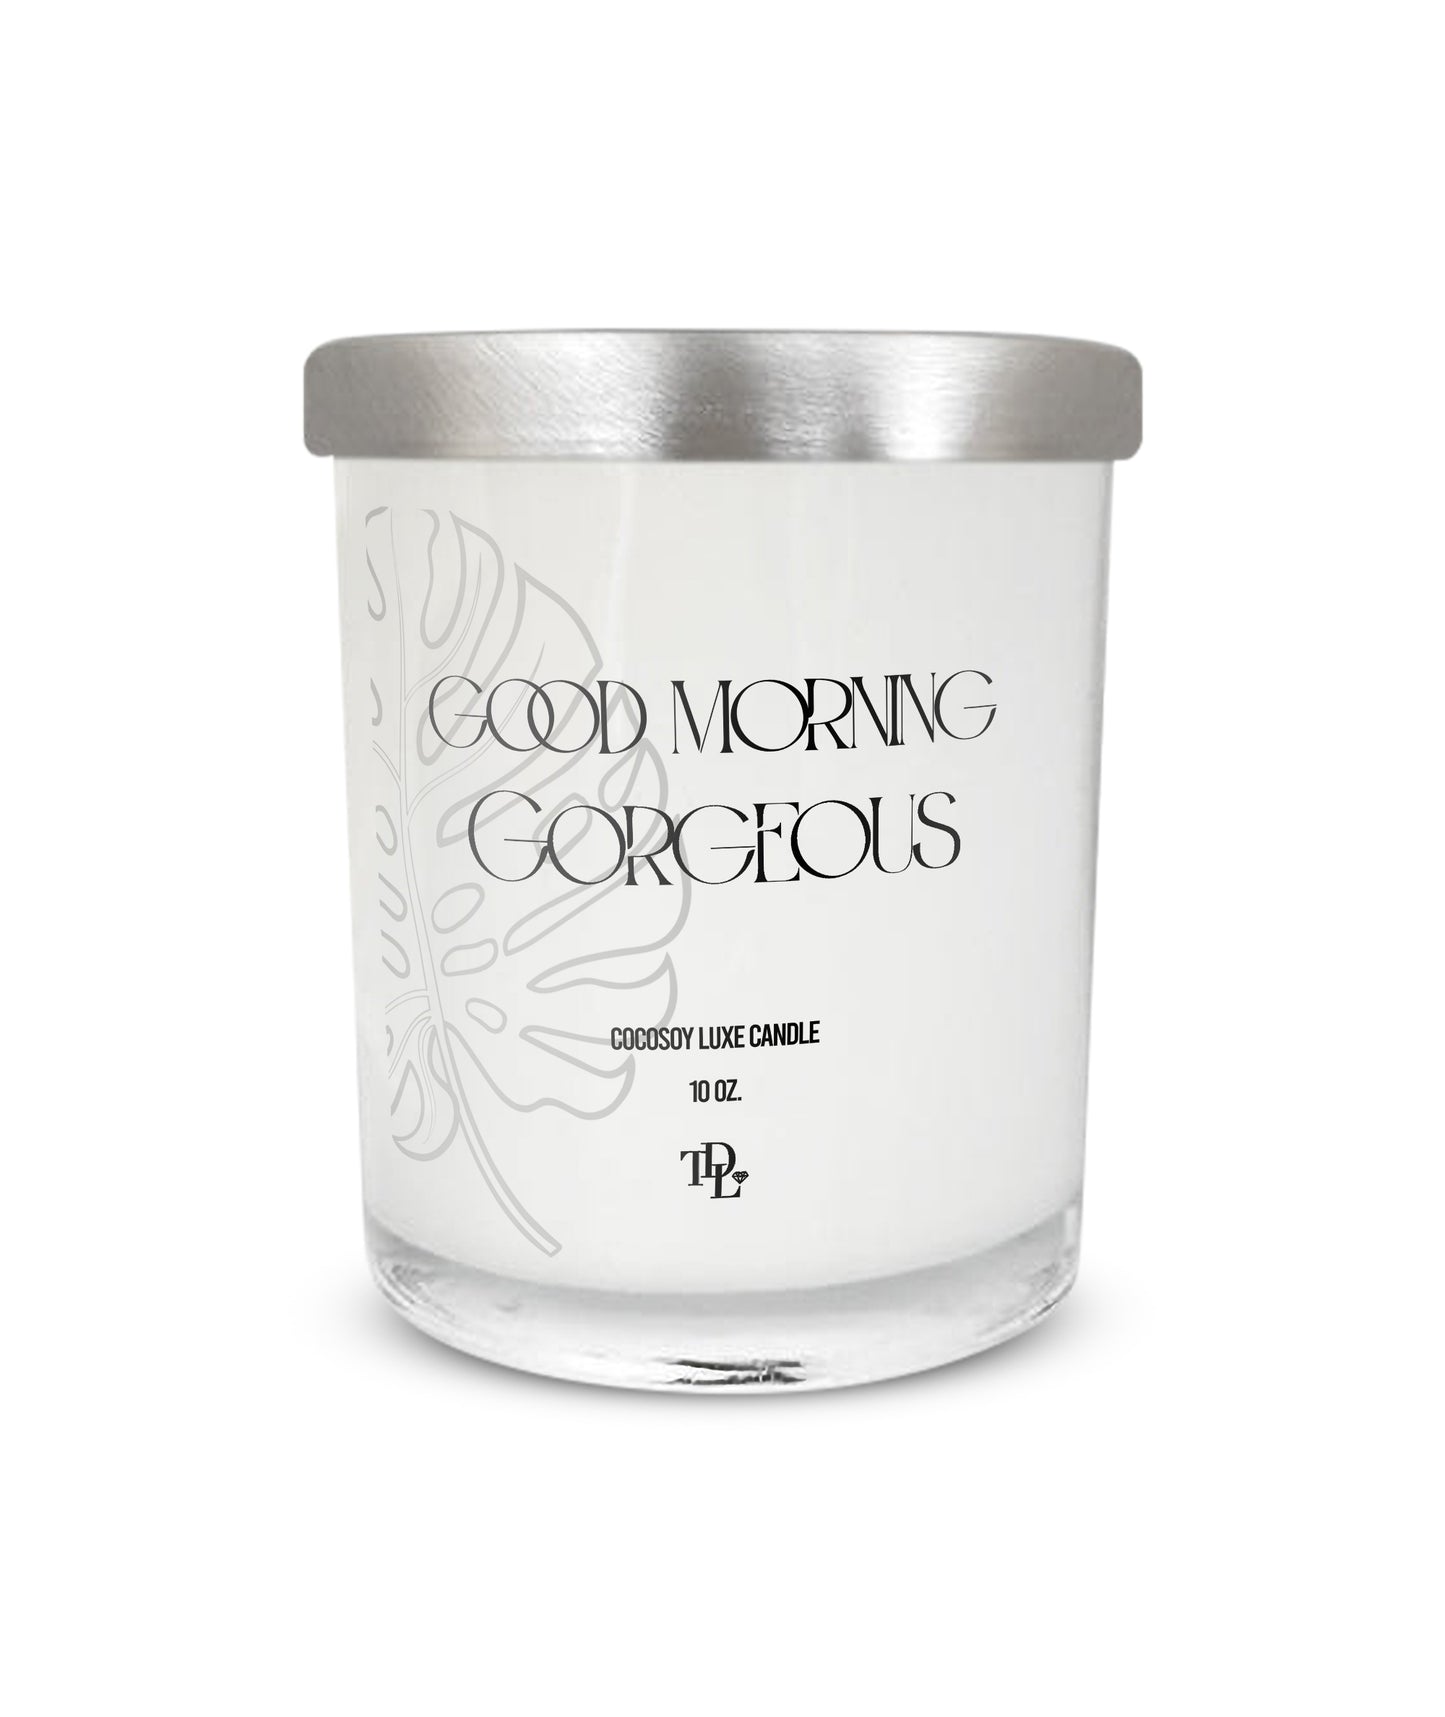 "Good Morning Gorgeous" Candle